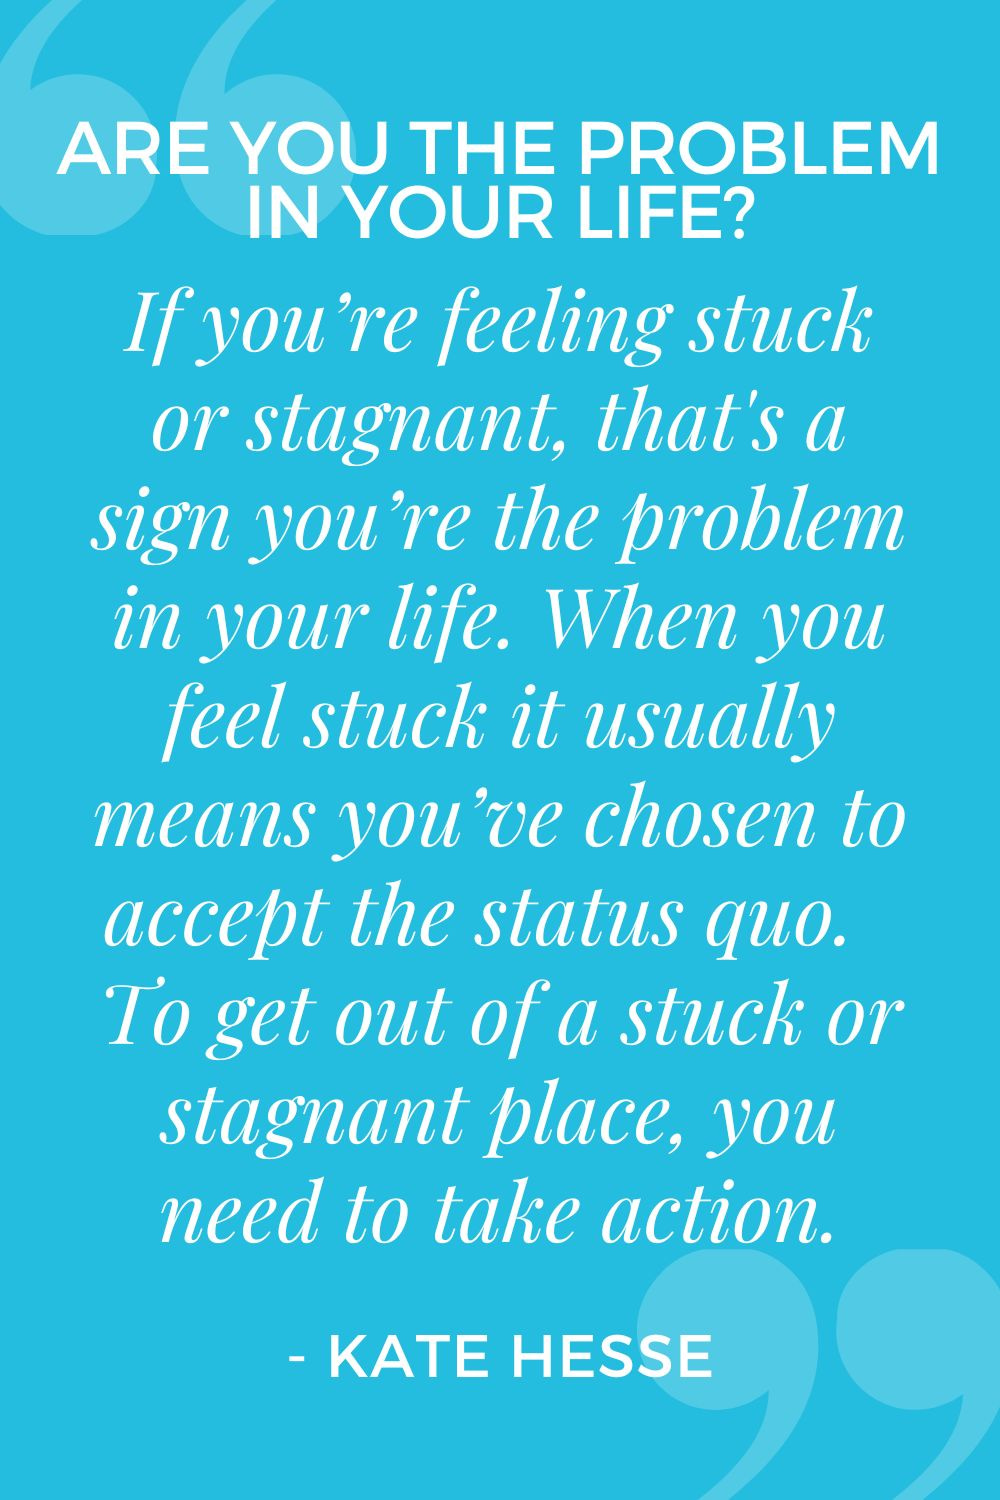 If you're feeling stuck or stagnant, that's a sign you're the problem in your life. When you feel stuck, it usually means you've chosen to accept the status quo. To get out of a stuck or stagnant place, you need to take action.